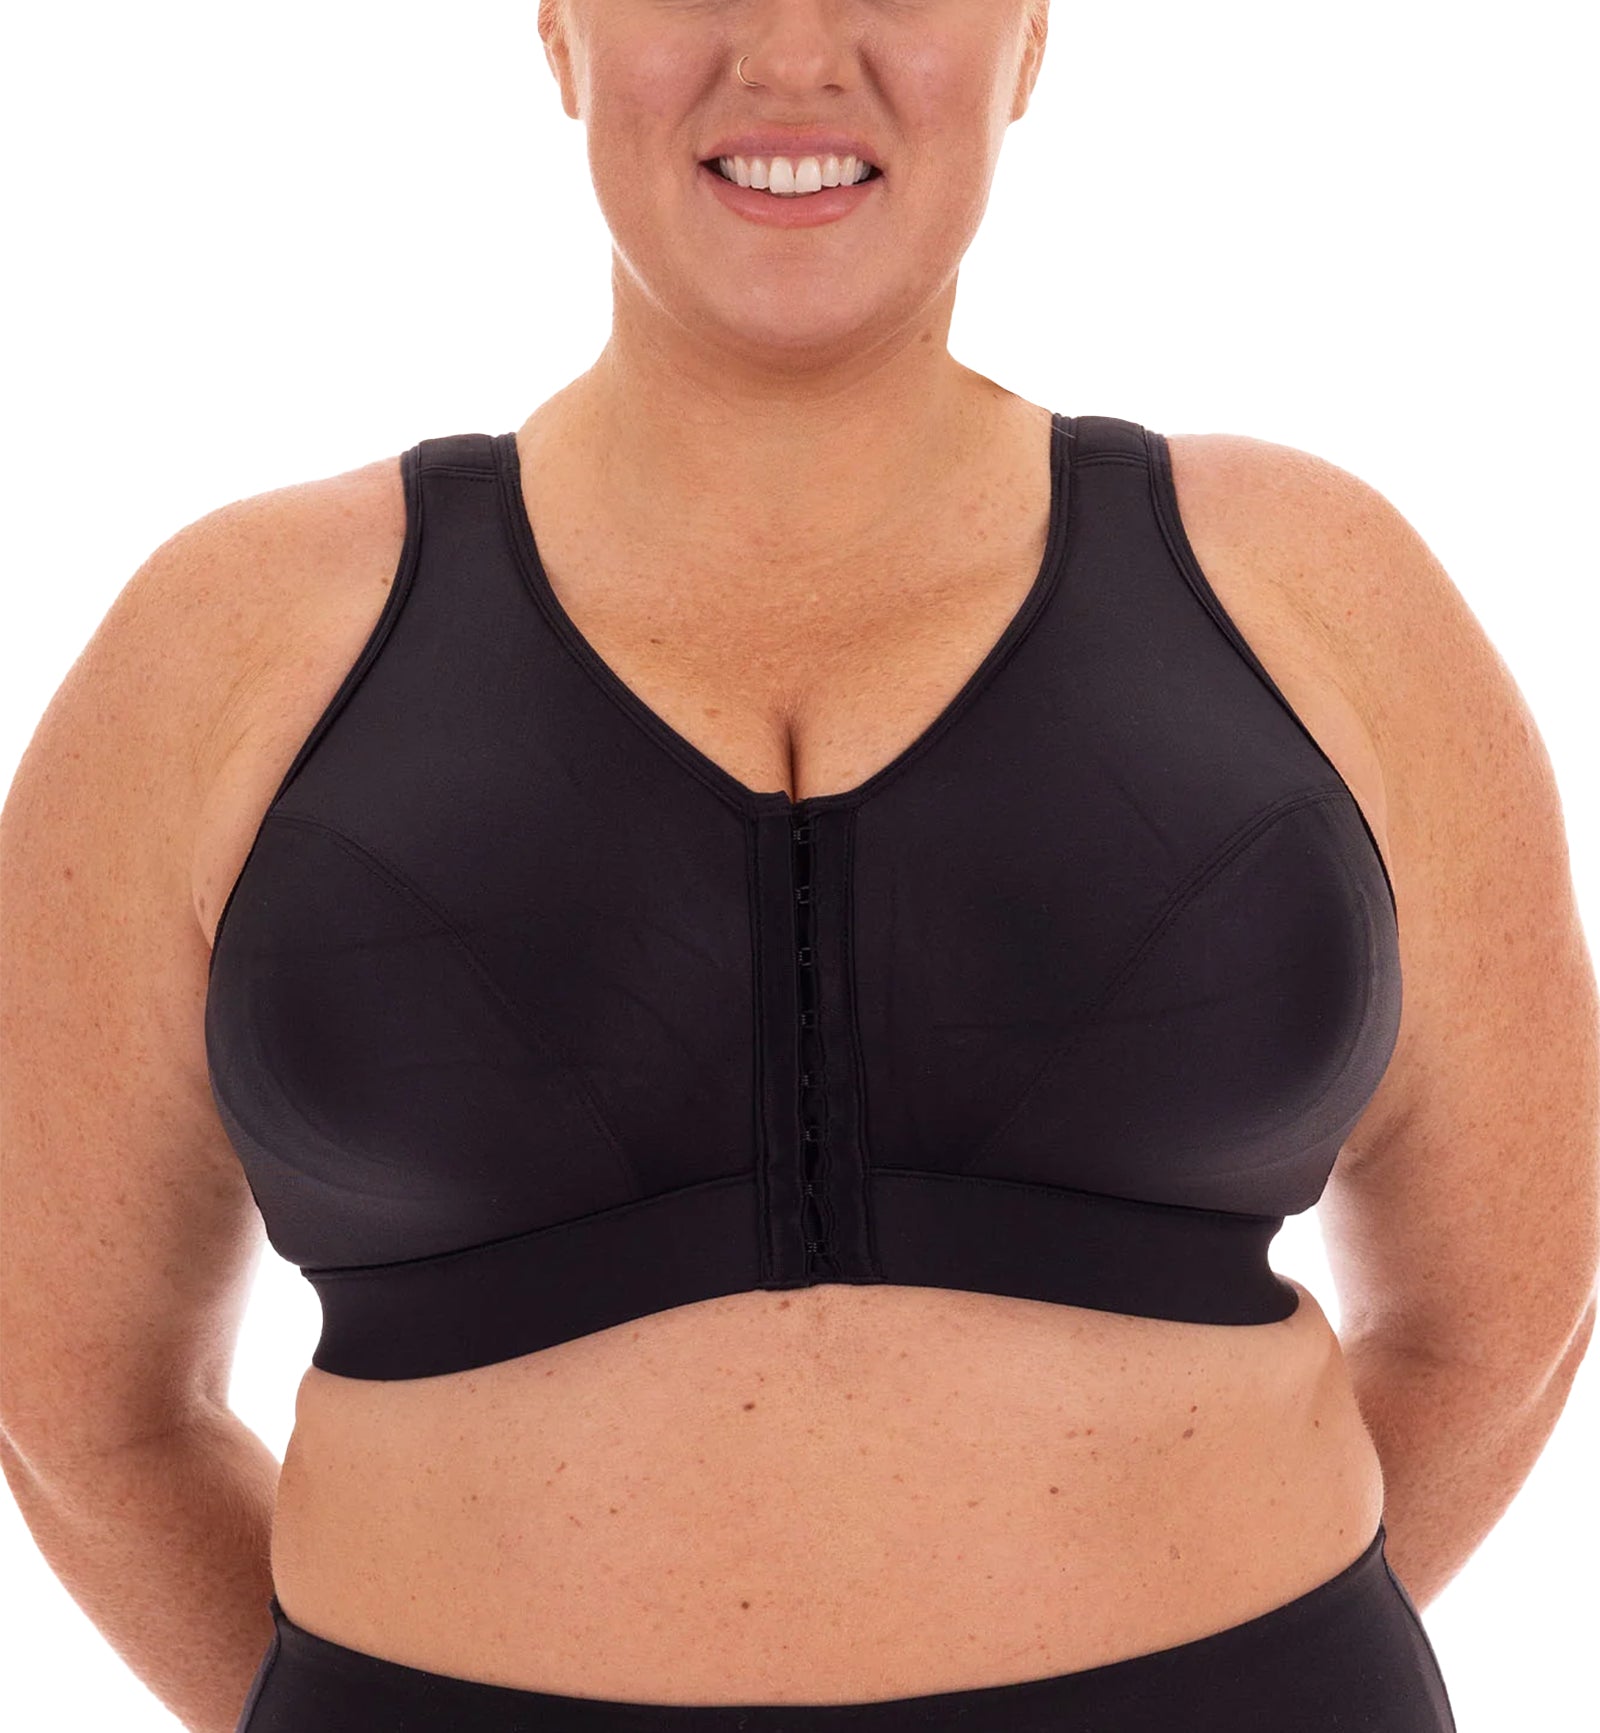 New seamed printed strap detail sports bra that supports you every